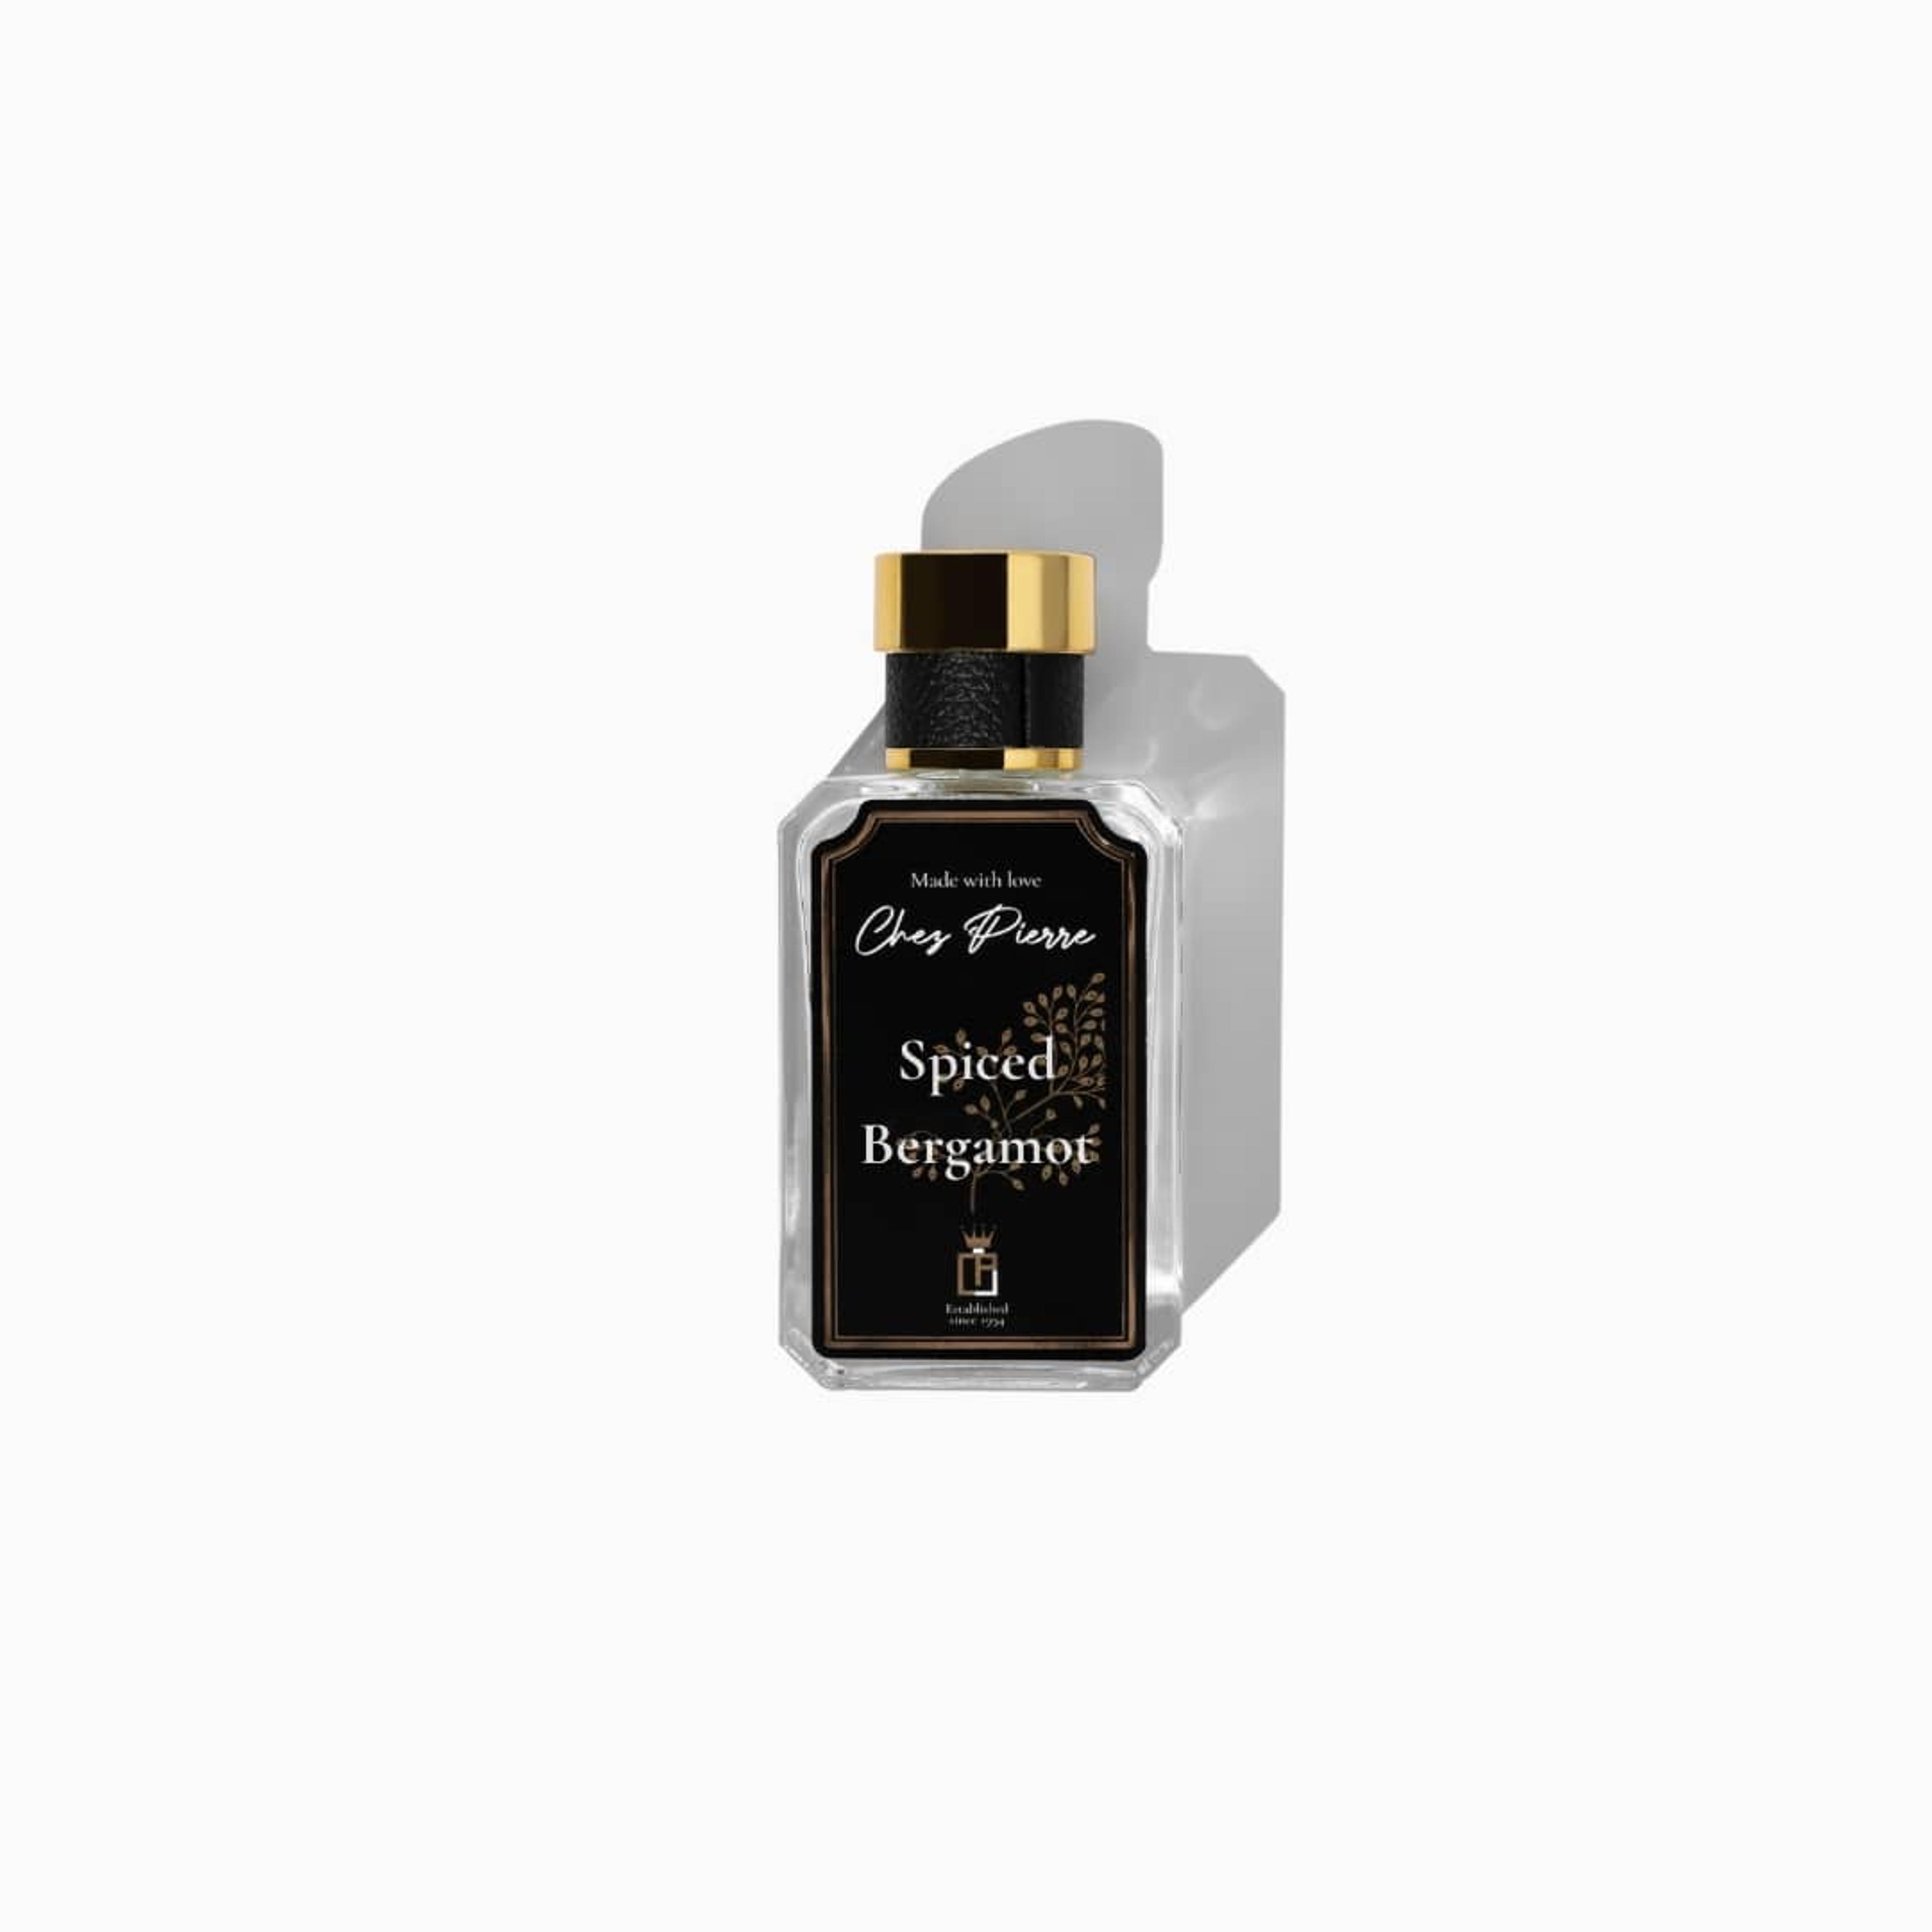 Chez Pierre's Spiced Bergamot Perfume Inspired By Sauvage Elixir